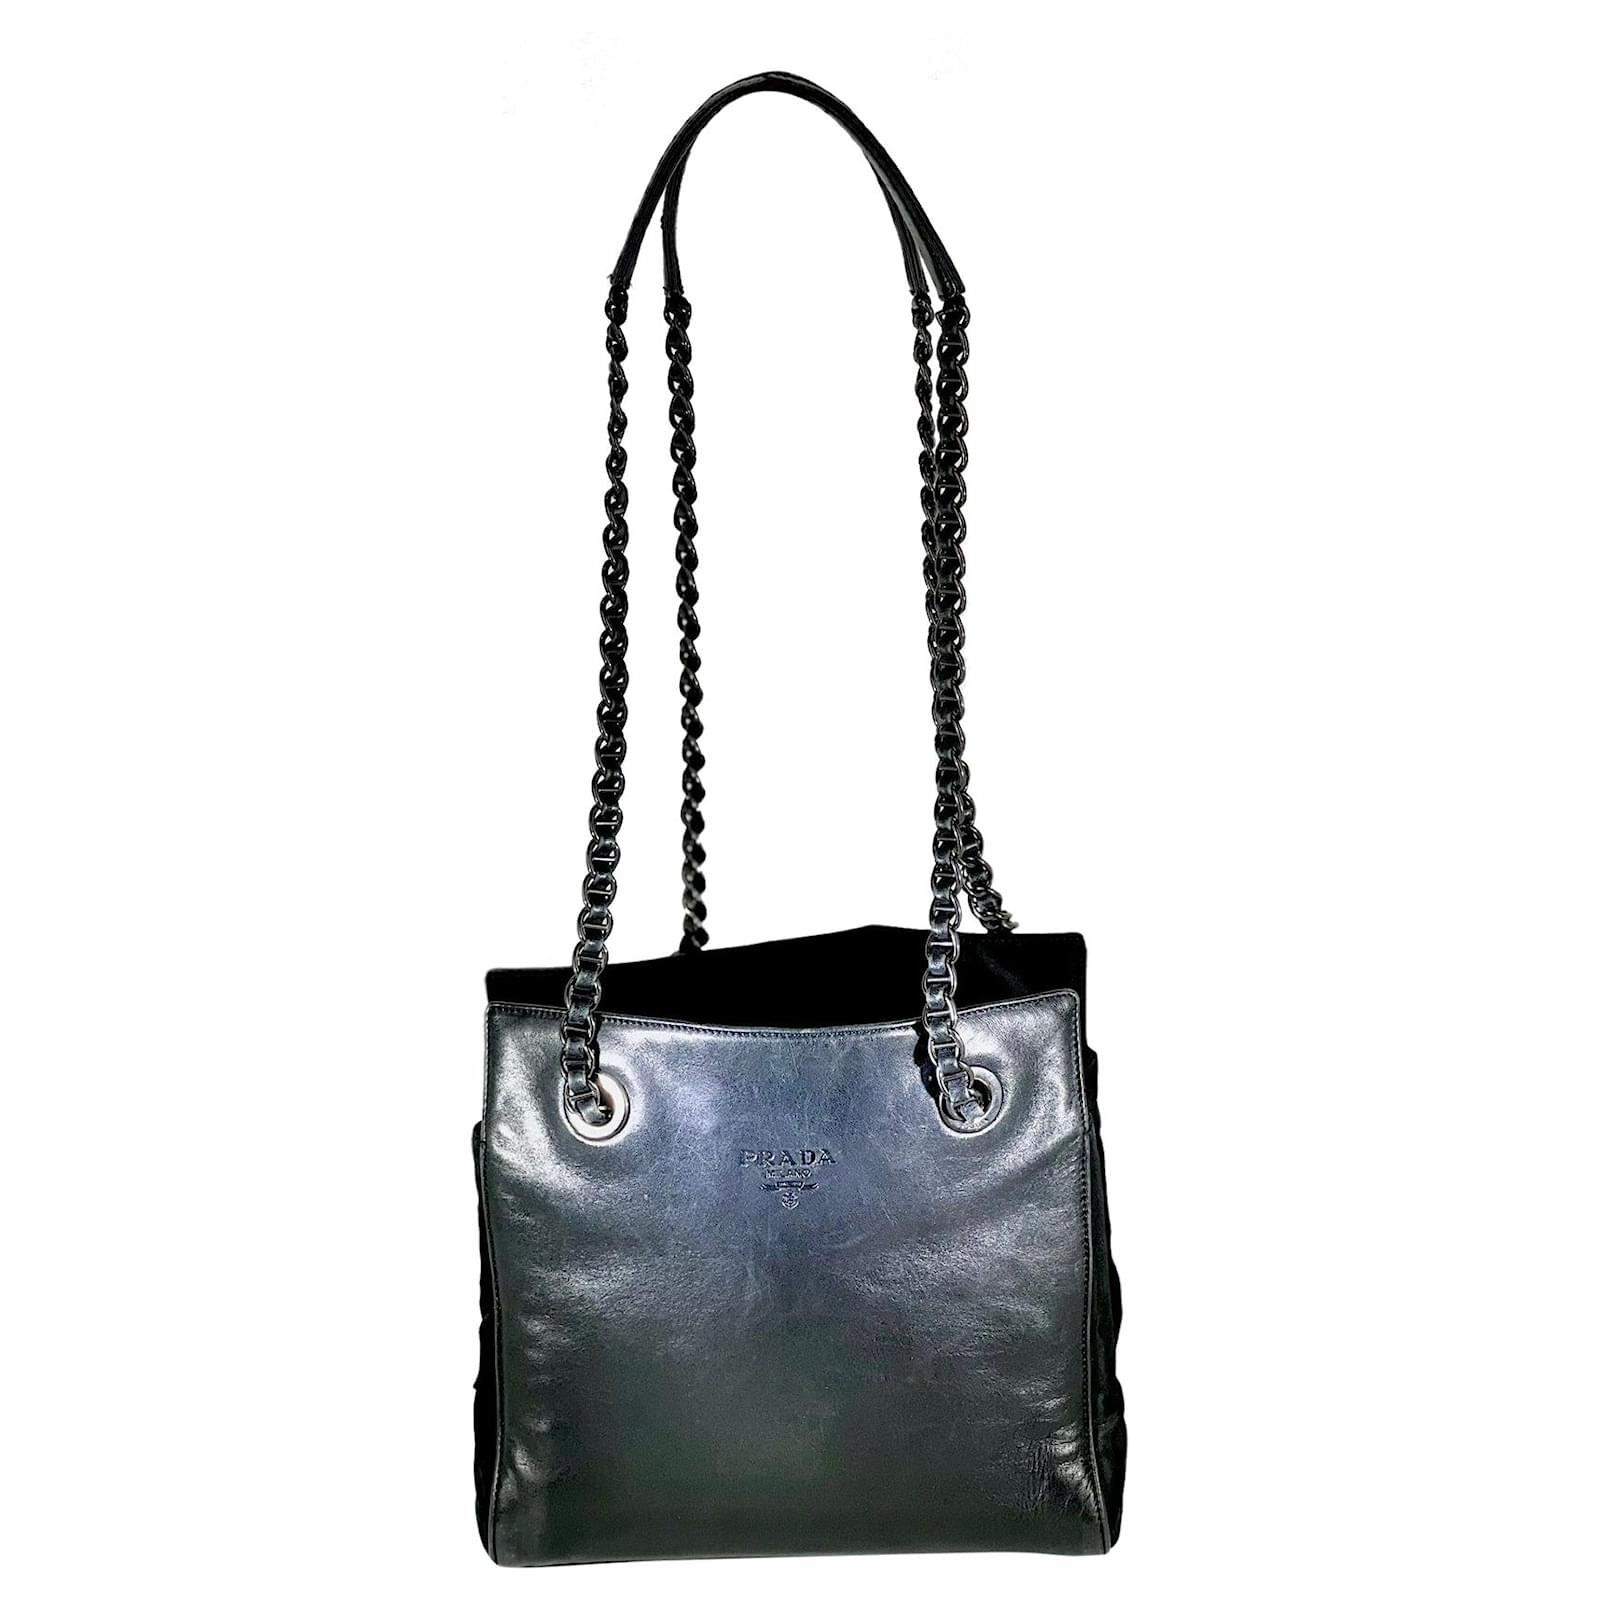 PRADA GAUFRE BLACK NAPPA LEATHER TOTE, with double handle and